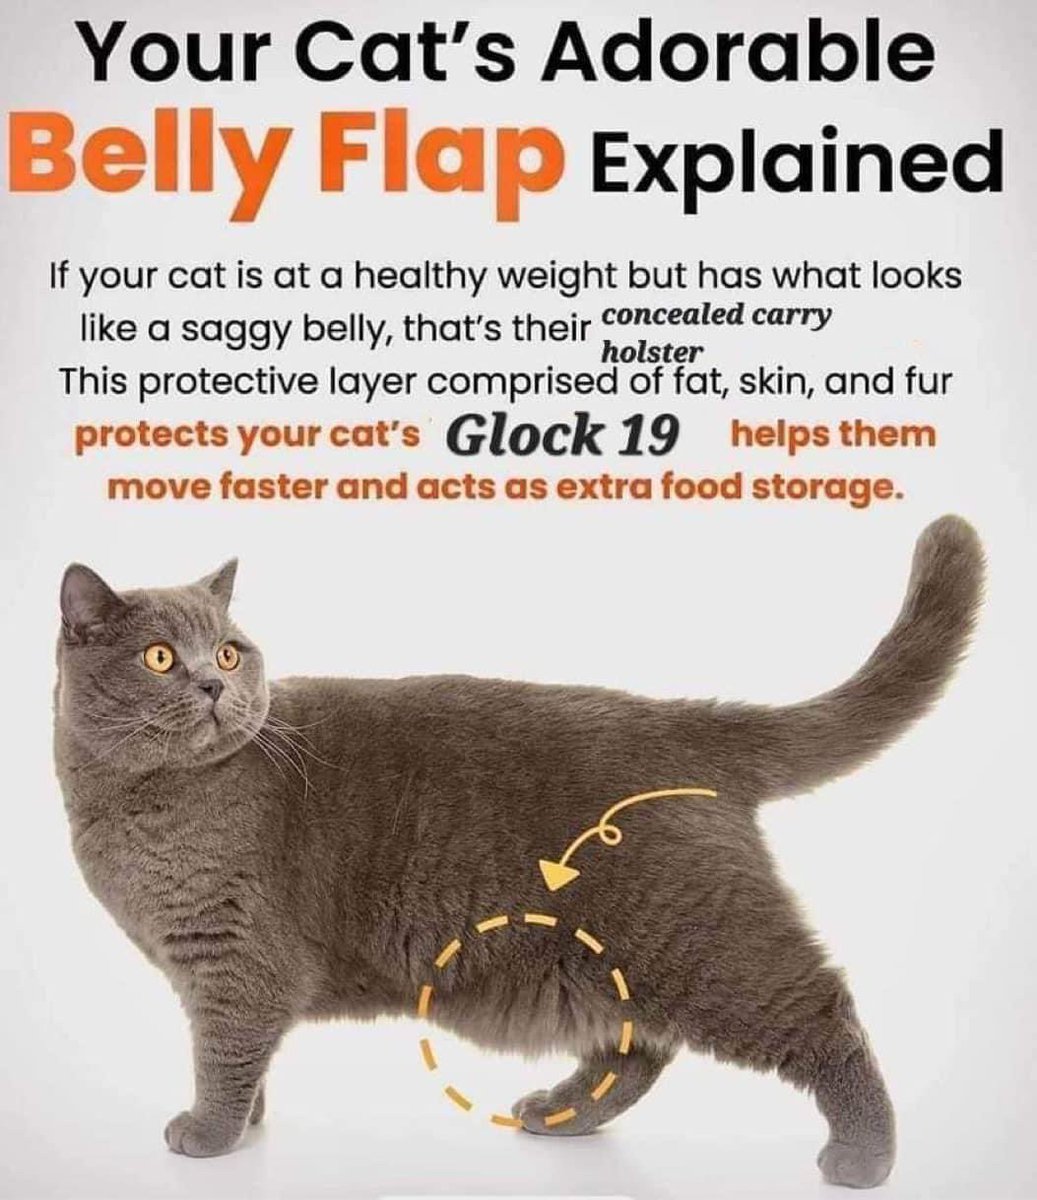 Your cat’s belly fat exists for a reason. And that reason is badass.